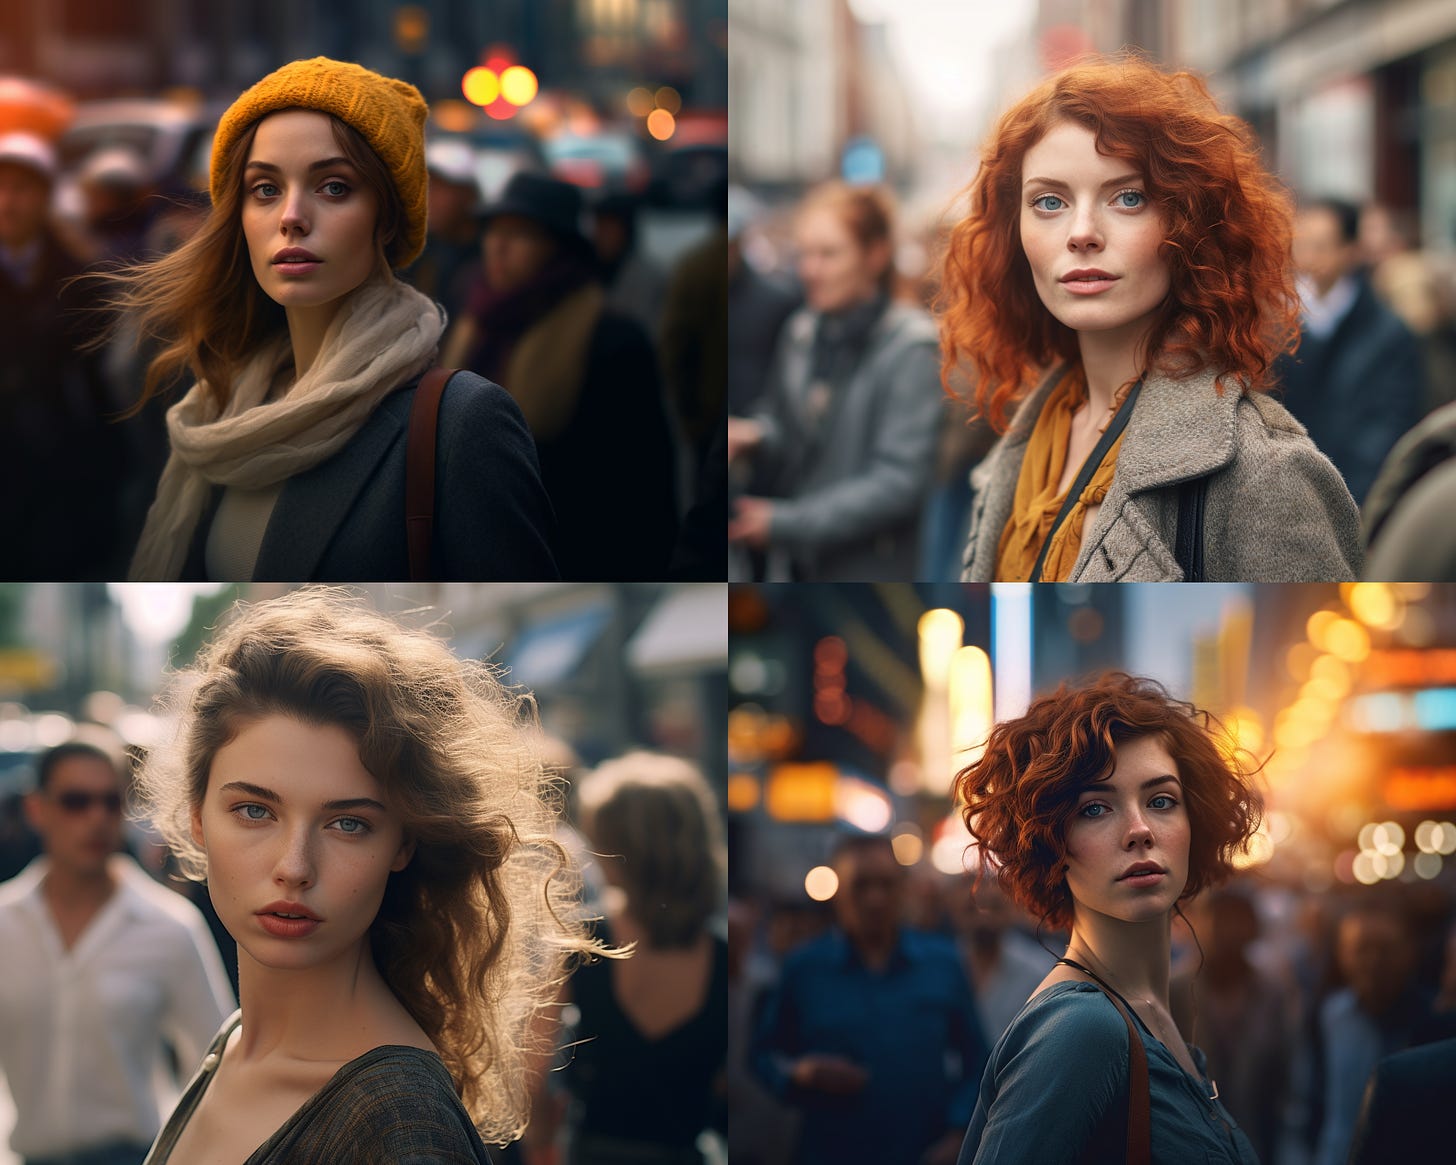 Four-grid output with four professional photos of women on a busy street. Midjourney V 5.1